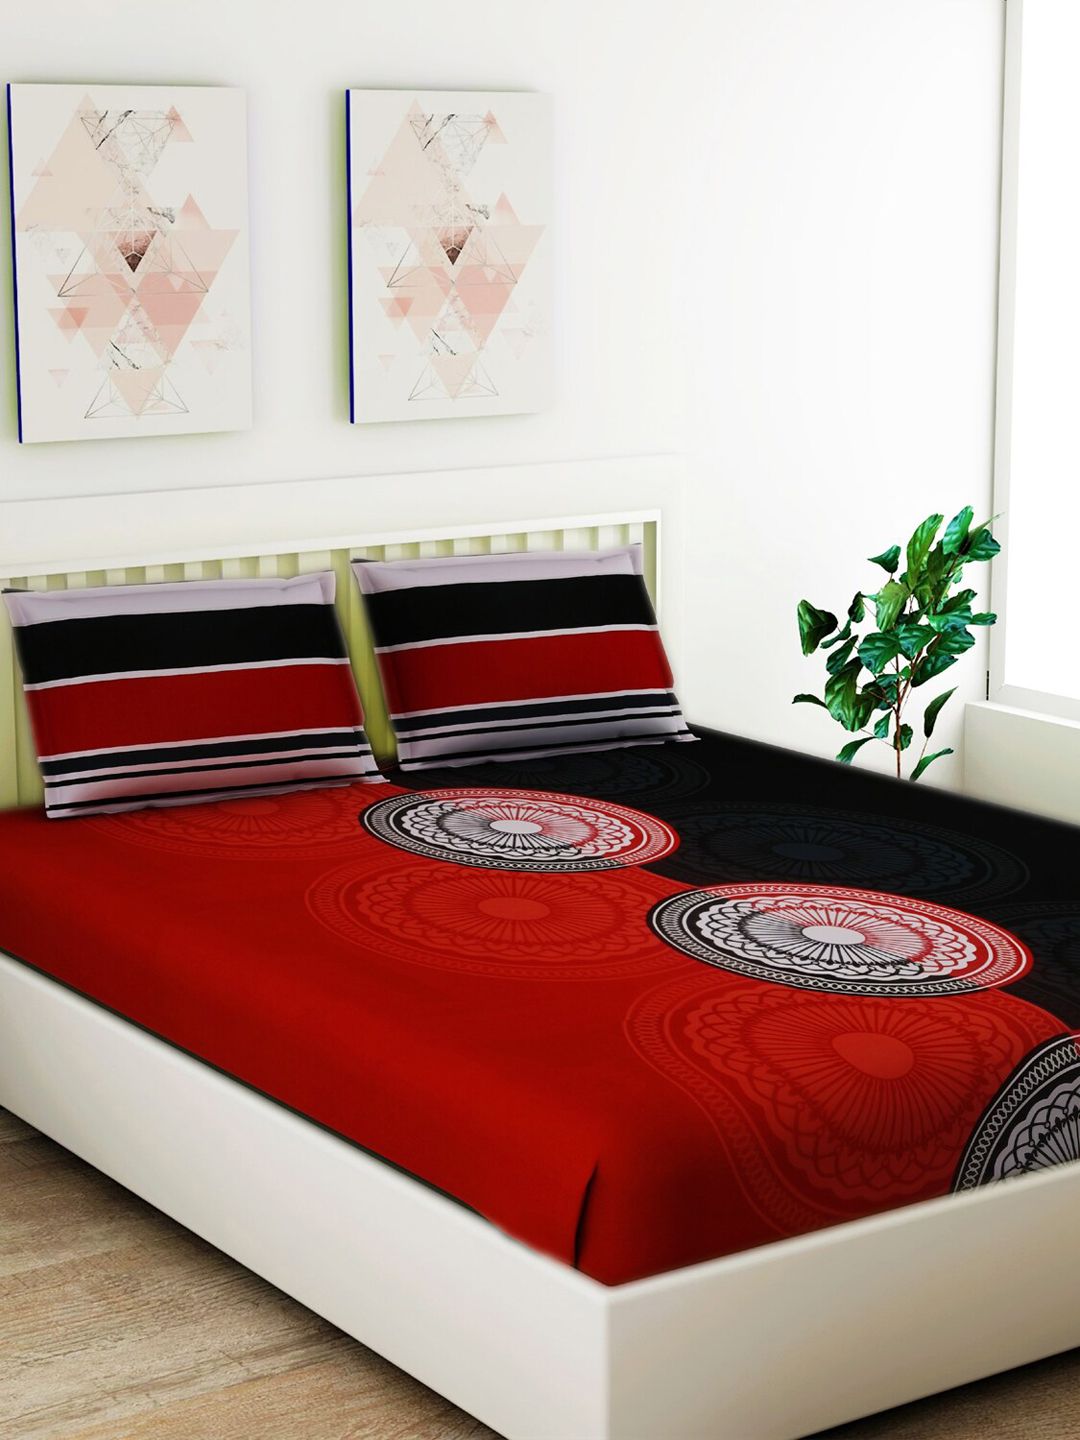 Salona Bichona Red & Black Ethnic Motifs 120 TC Cotton 1 King Bedsheet with 2 Pillow Covers Price in India